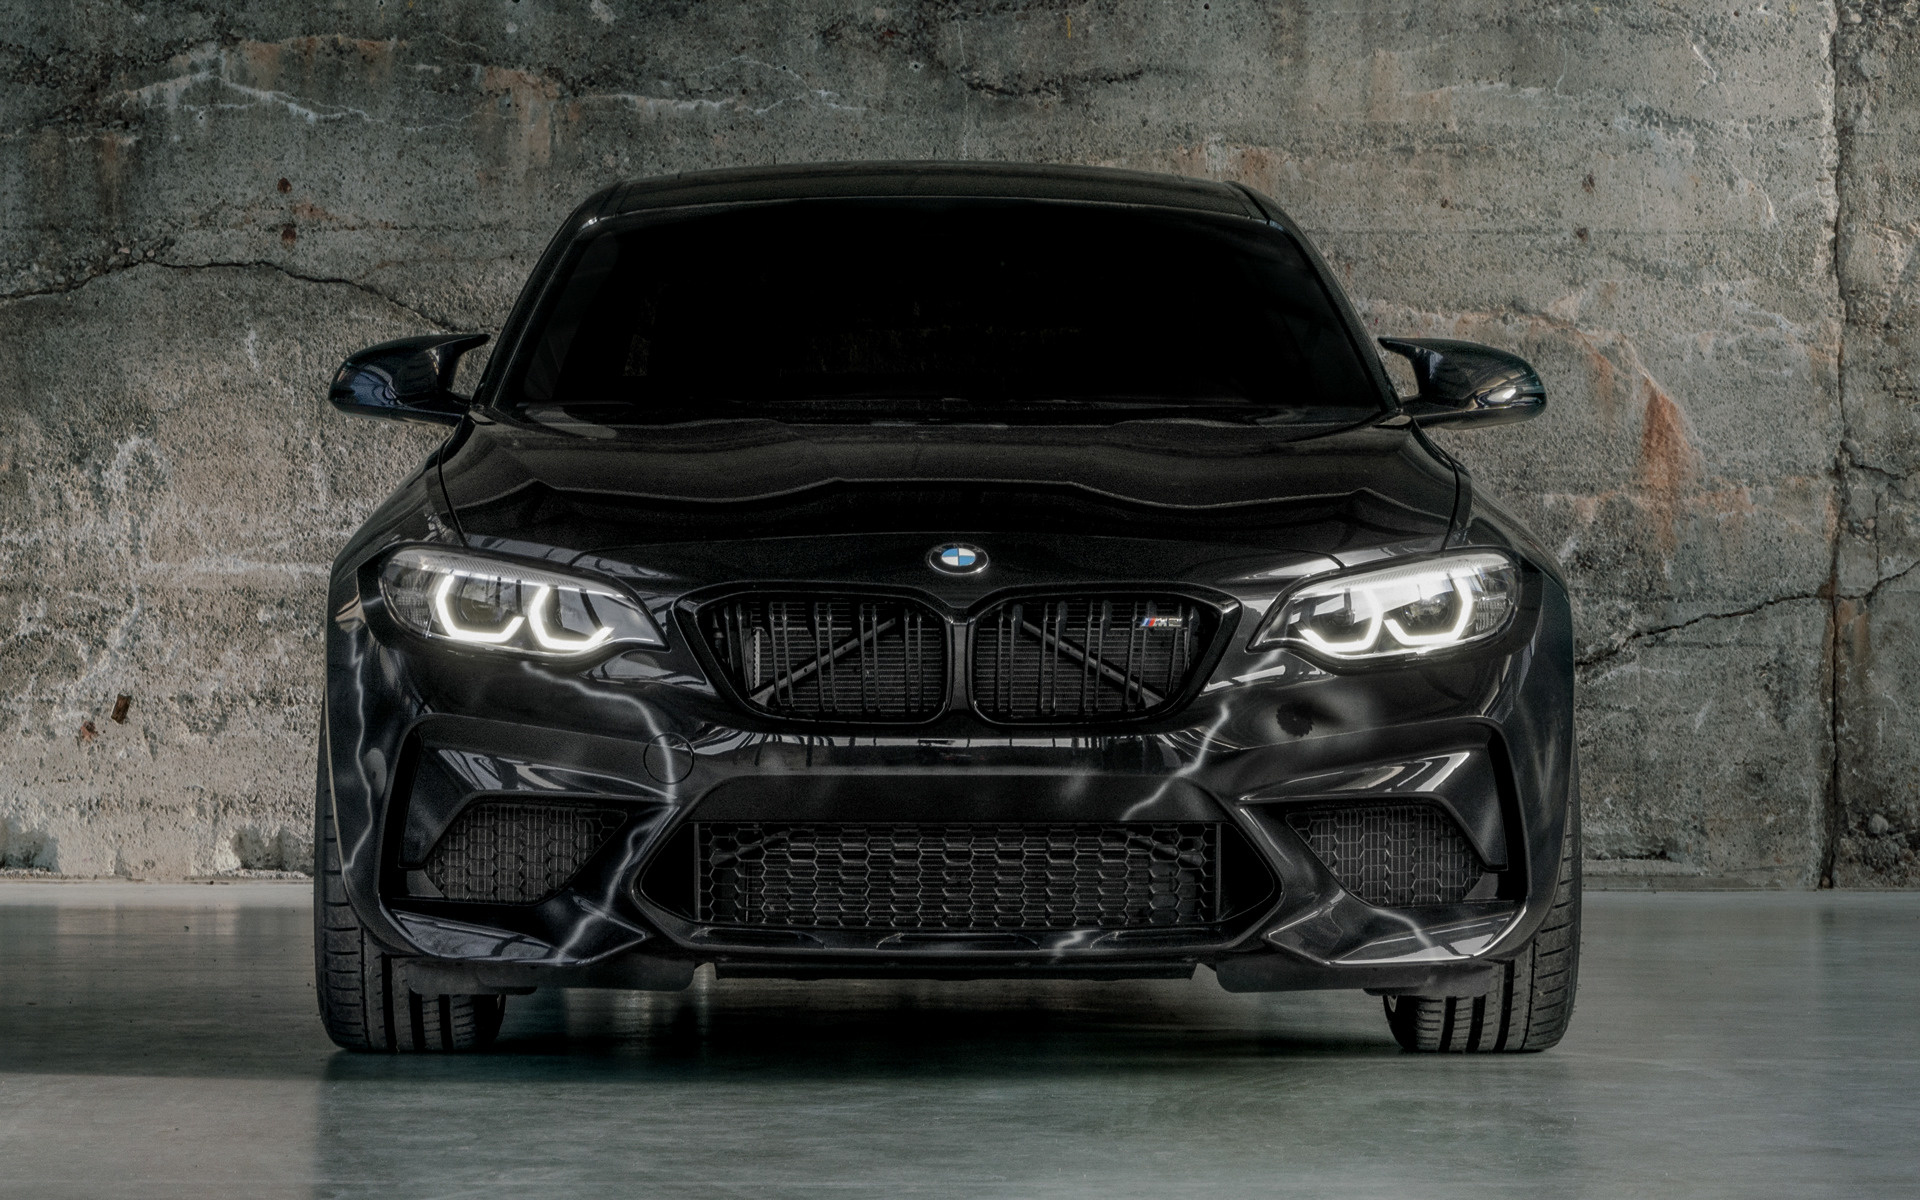 BMW M2 Coupe Edition designed by Futura 2000 and HD Image